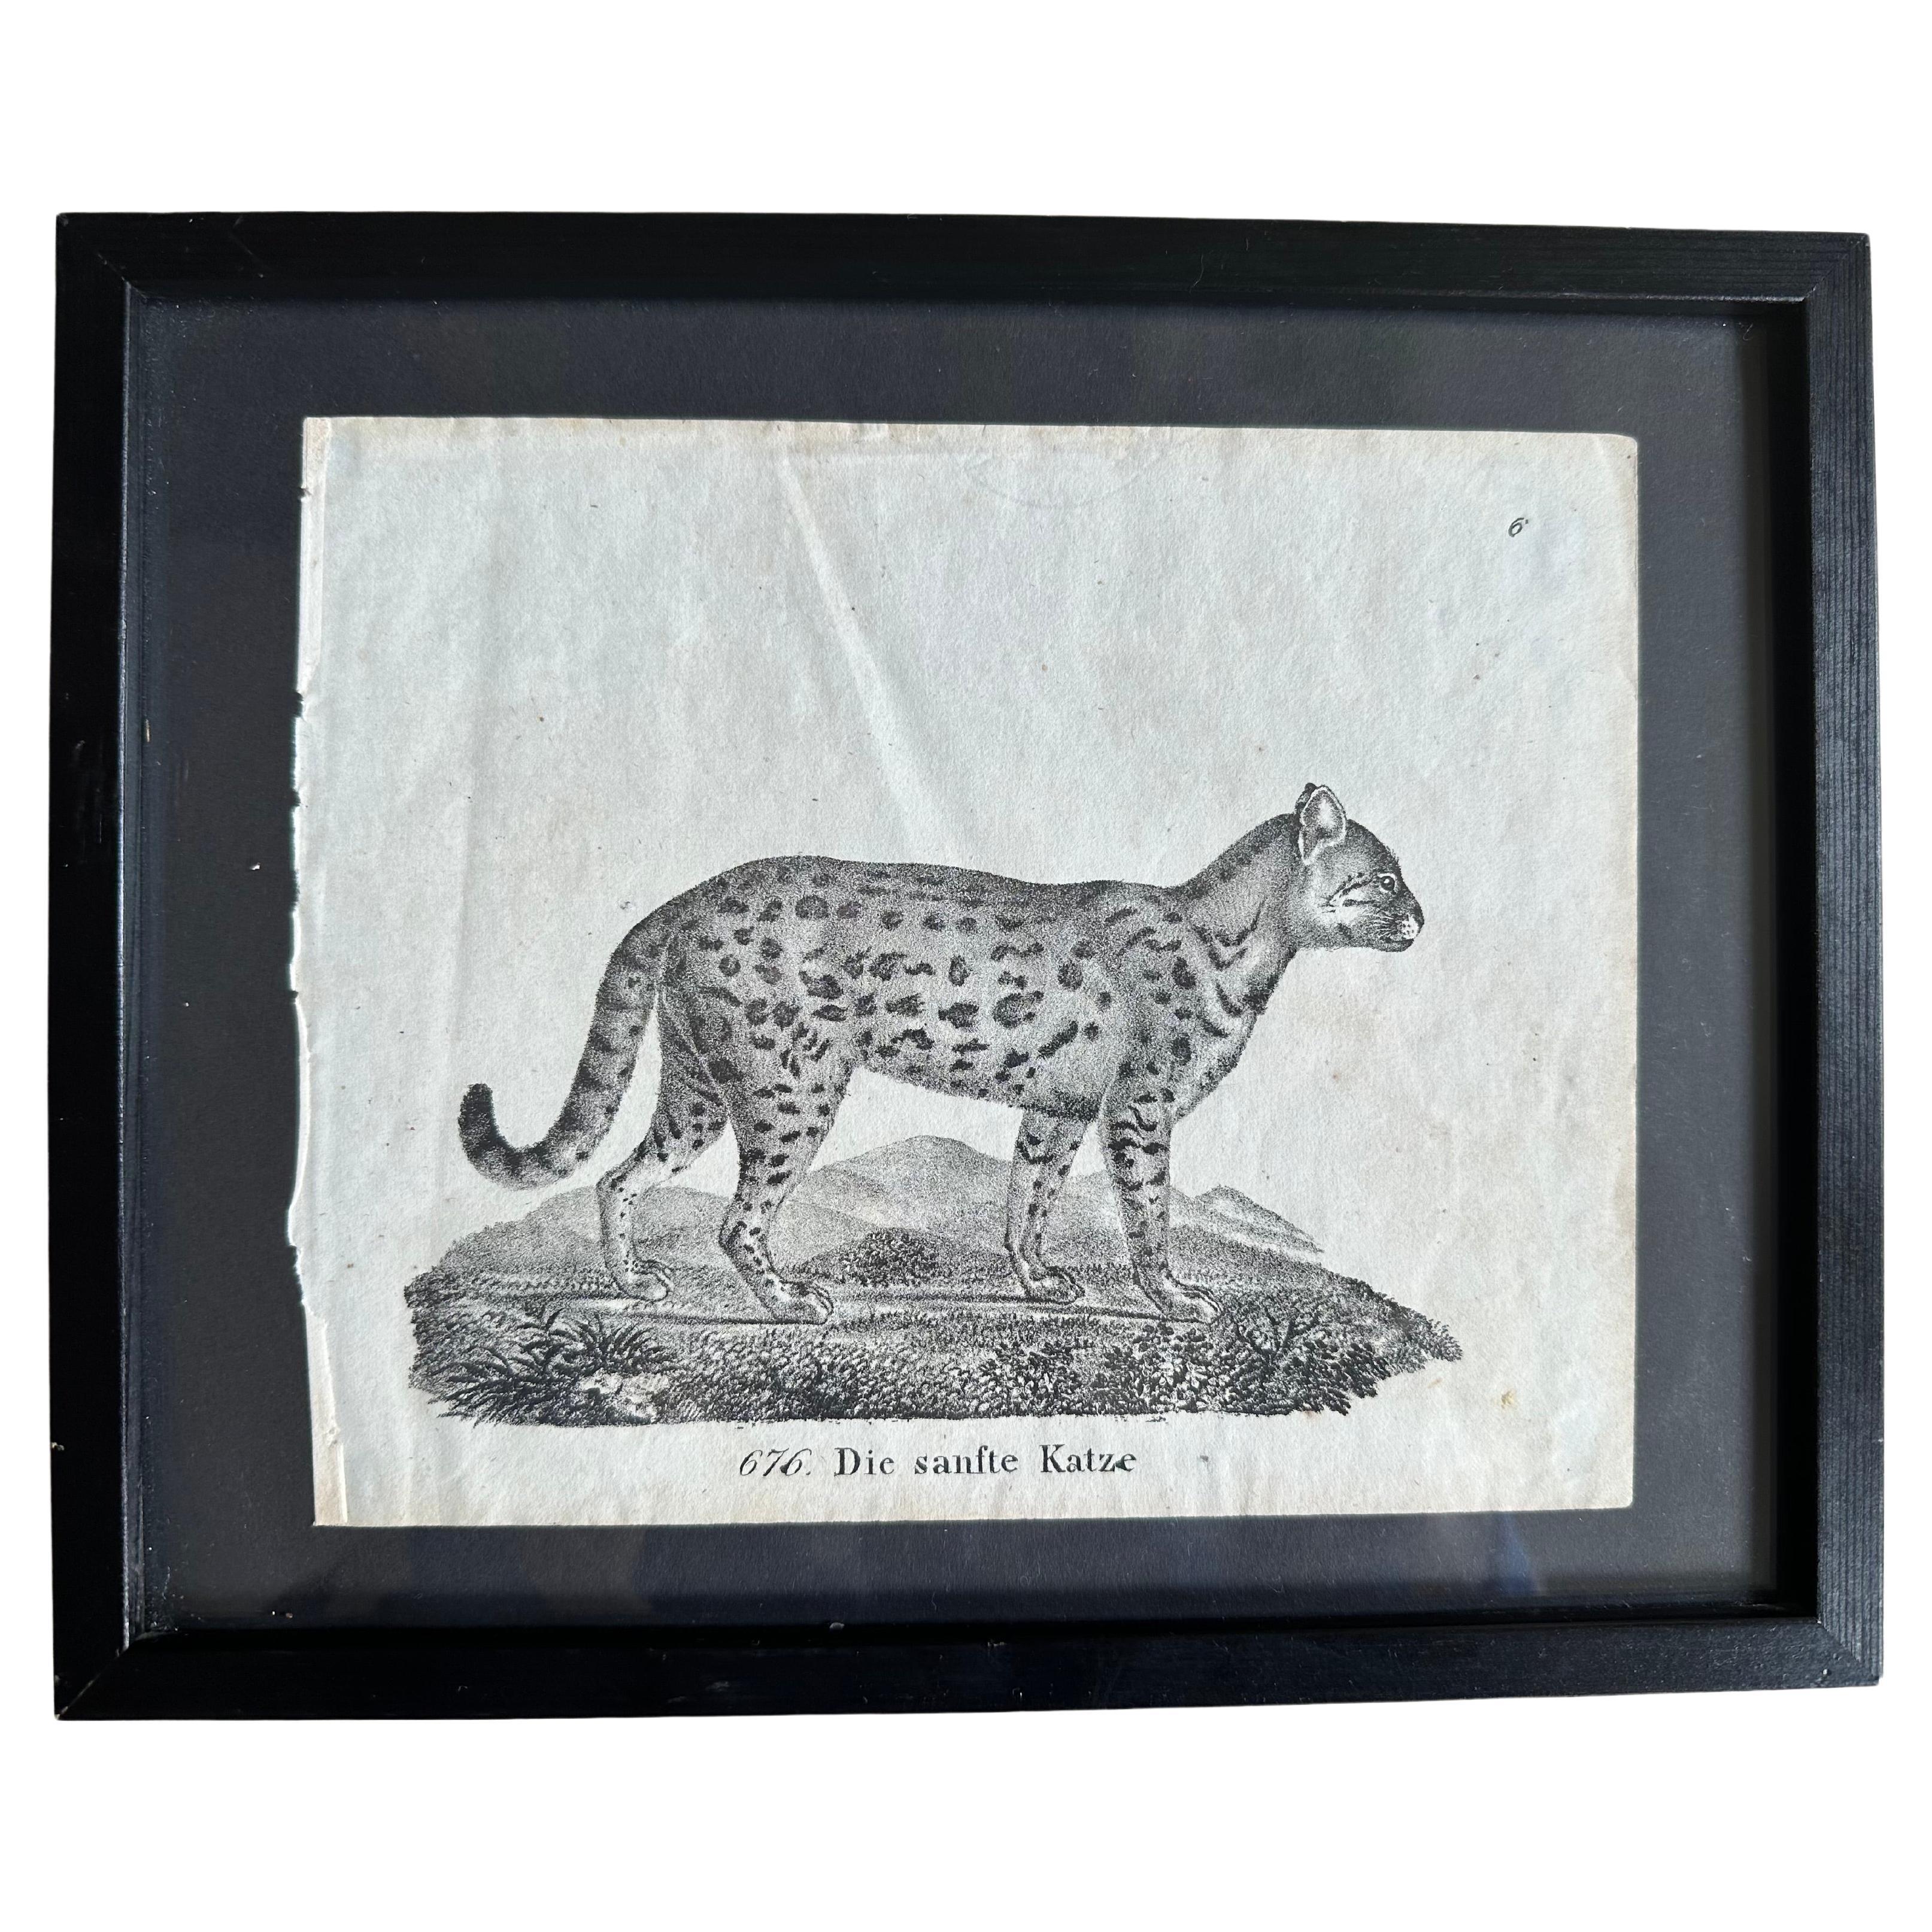 Zoological Original Lithograph Featuring "the gentle cat" from 1831-35